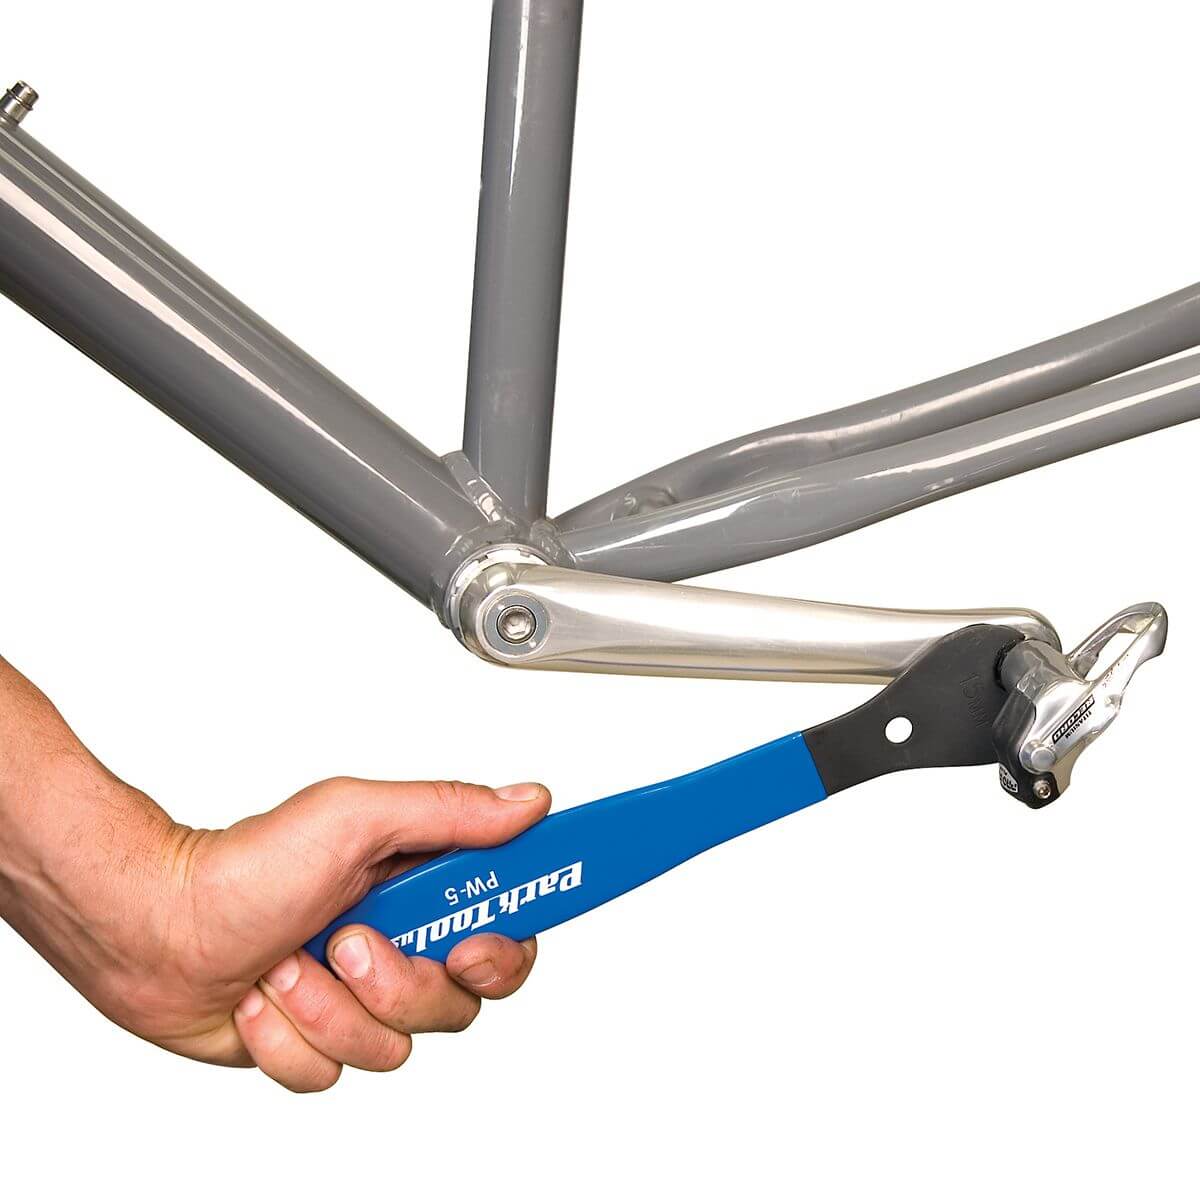 PARKTOOL PW-5 Pedal Wrench